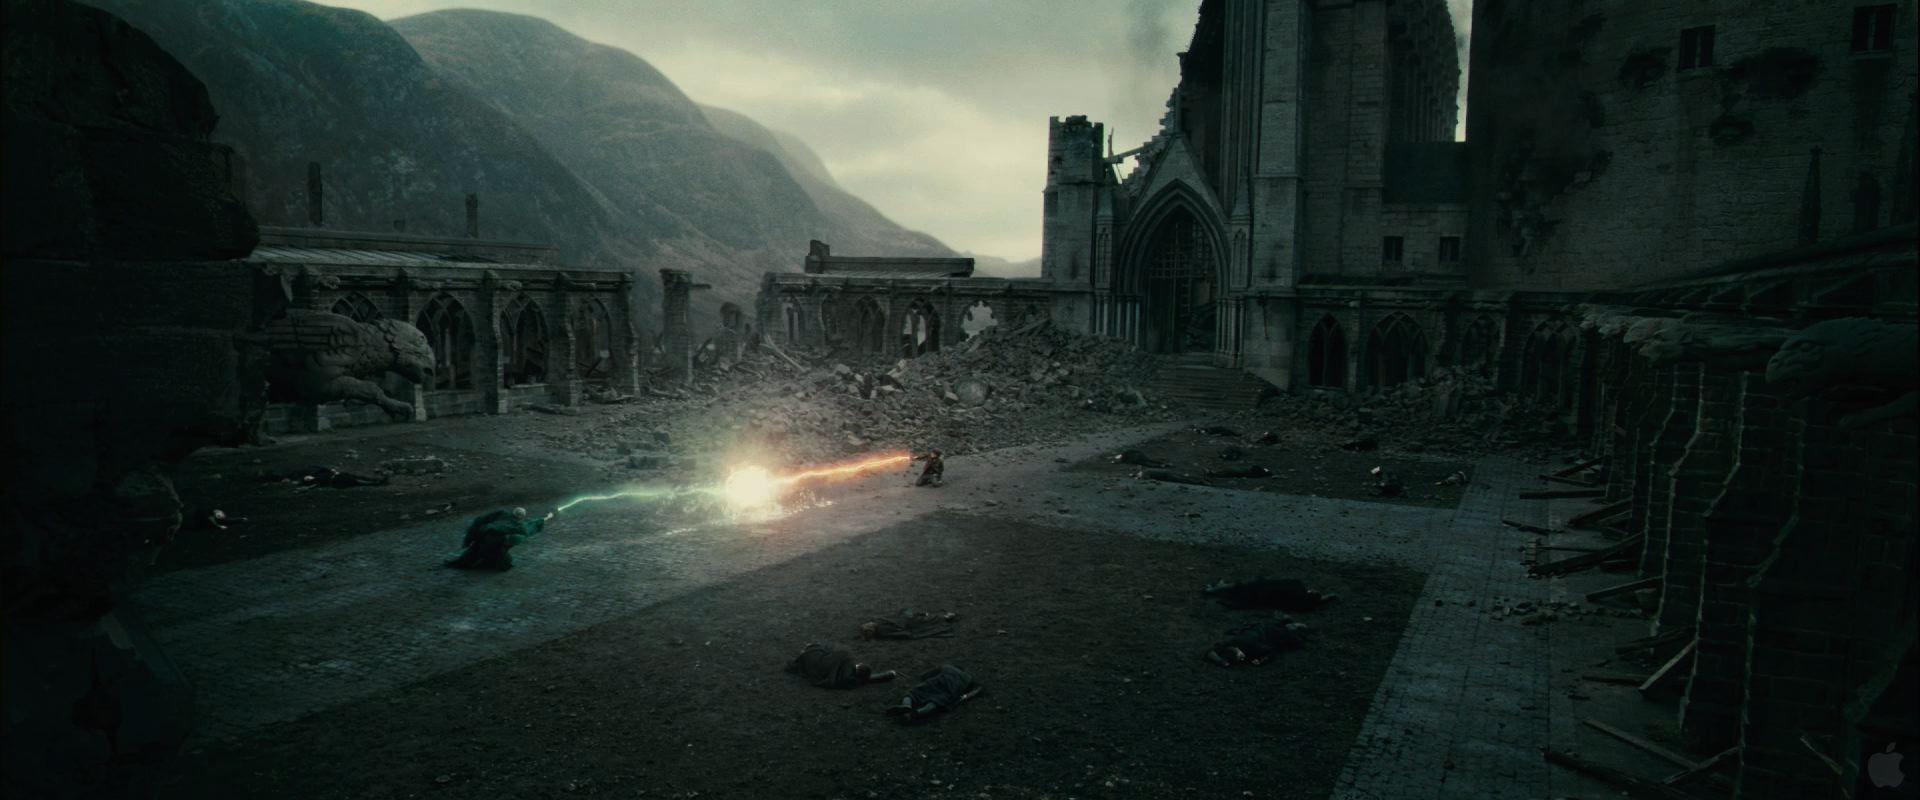 Harry Potter and Voldemort Duel in Harry Potter and the Deathly